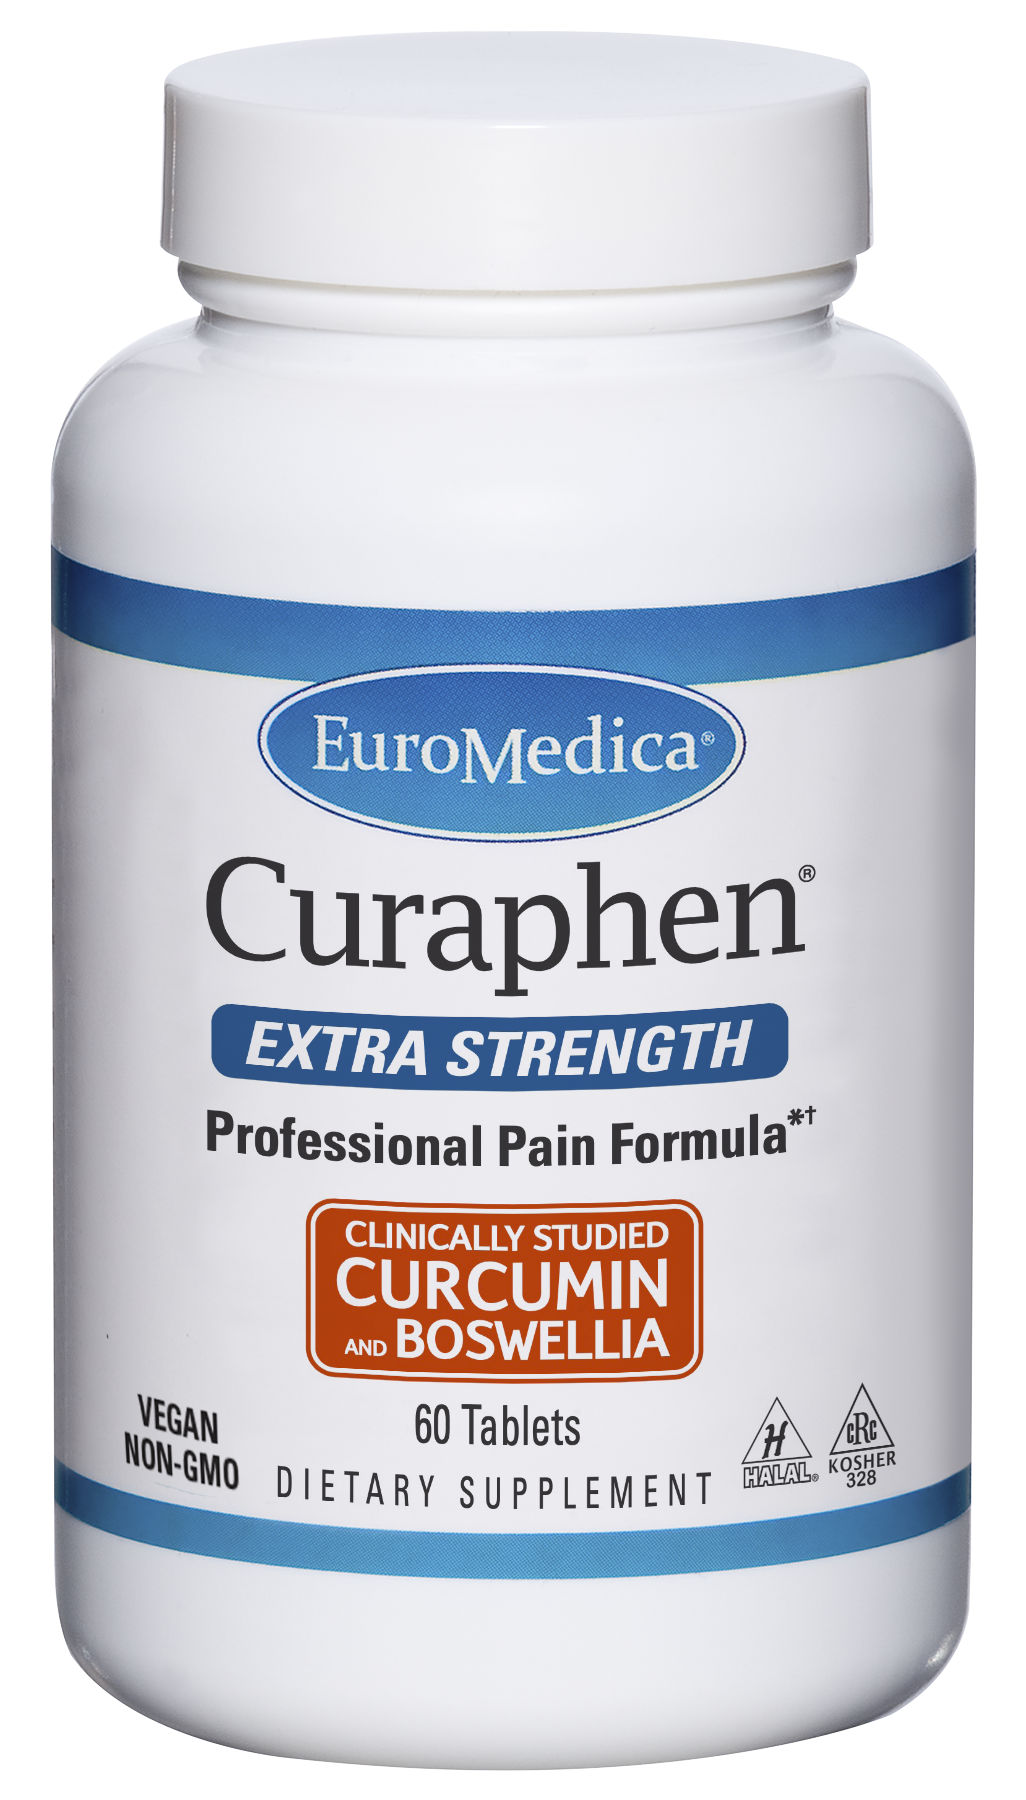 Curaphen Extra Strength bottle front